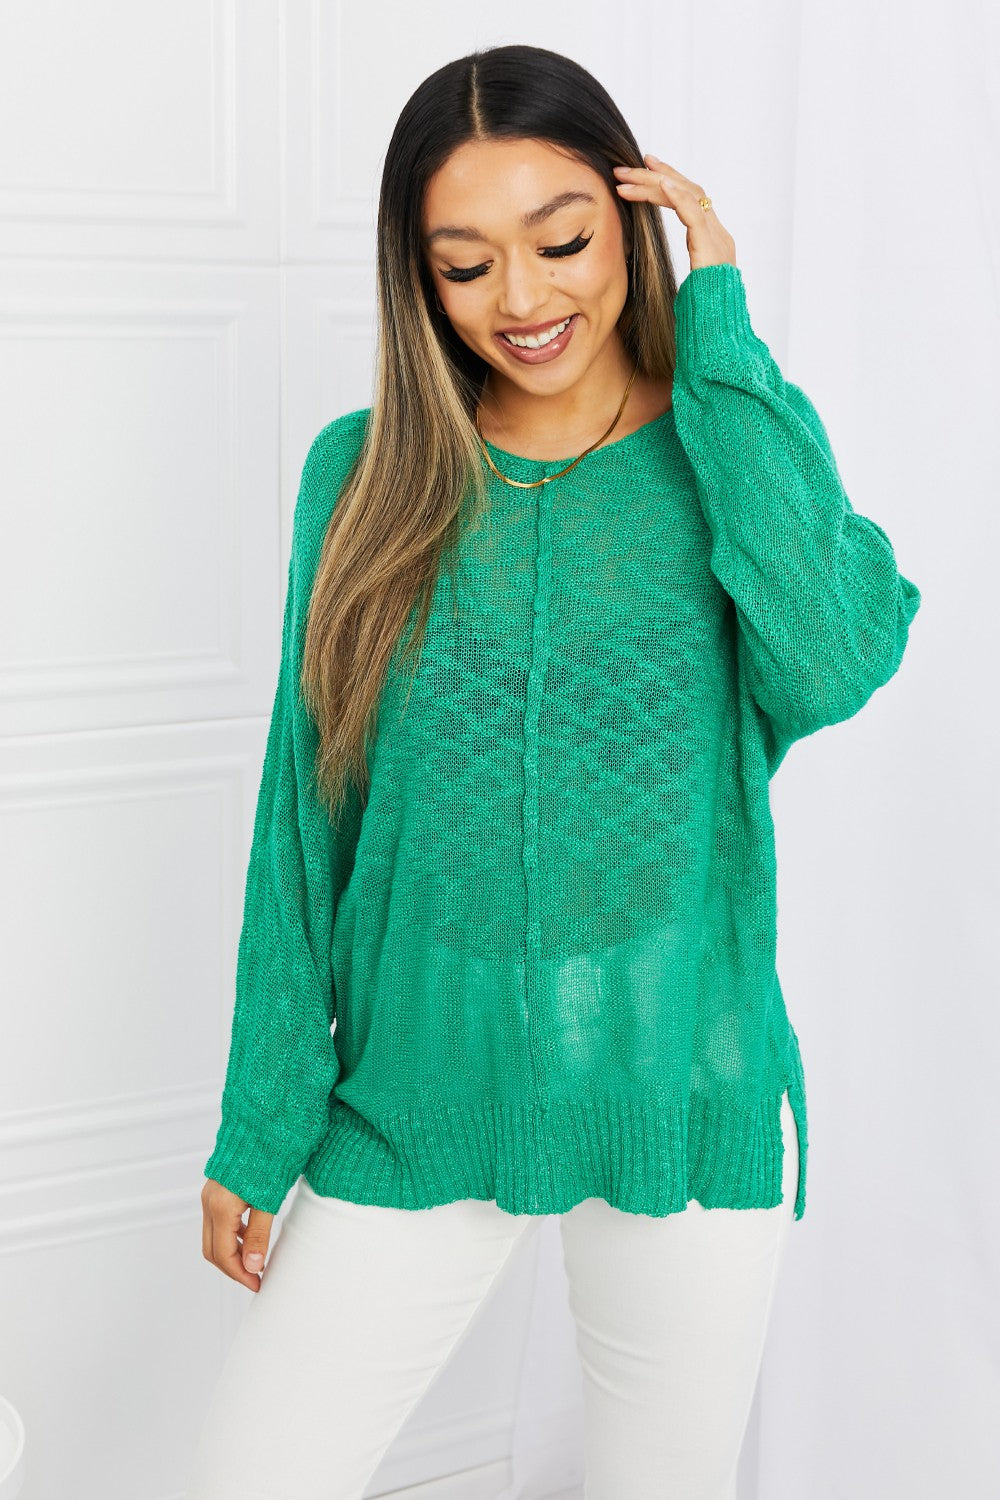 Exposed Seam Knit Top - Kelly Green